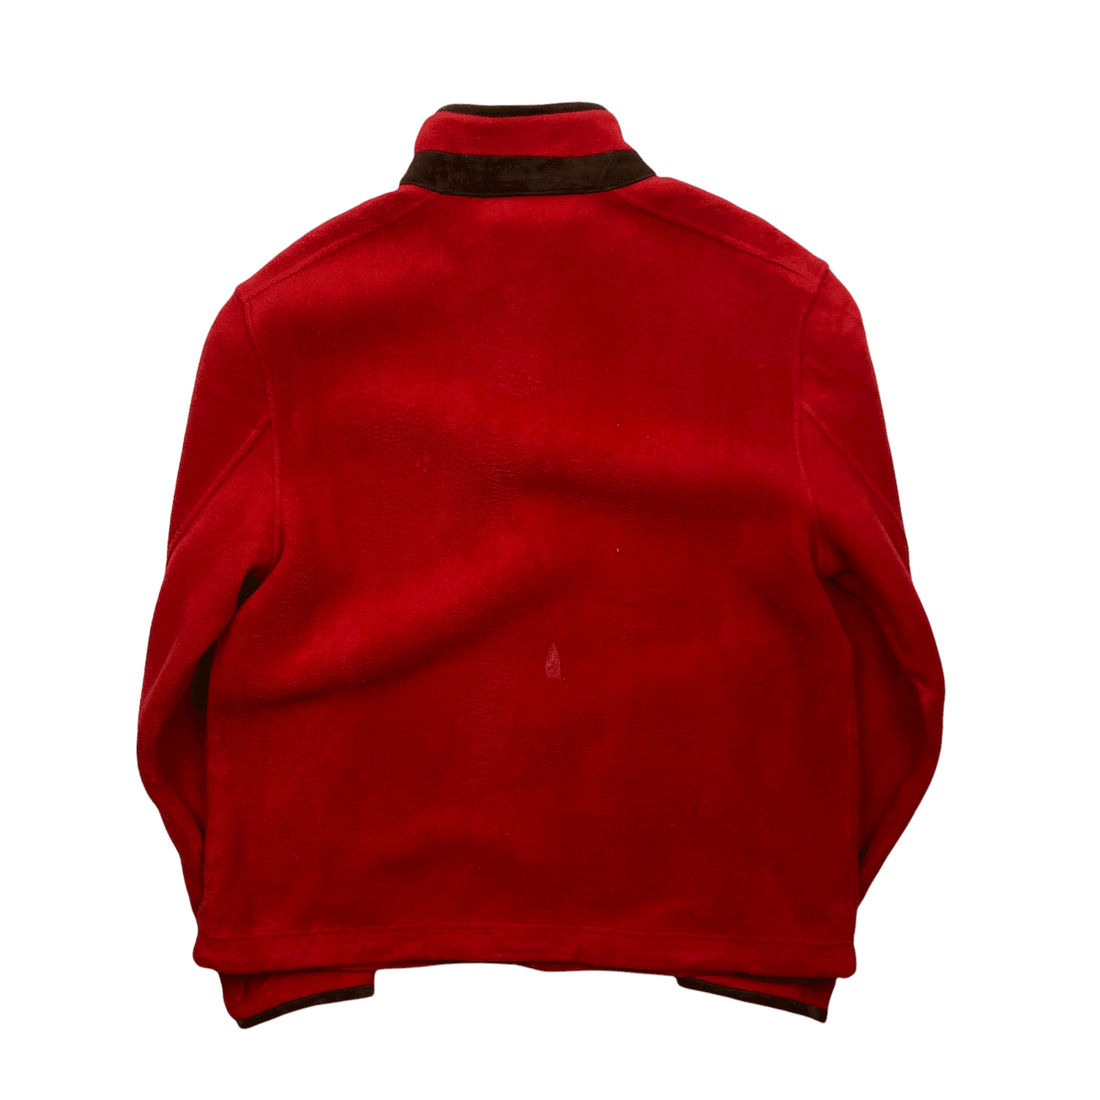 Vintage Red Polo Ralph Lauren Full Zip Fleece Jacket - Extra Large (Recommended Size - Large) - The Streetwear Studio